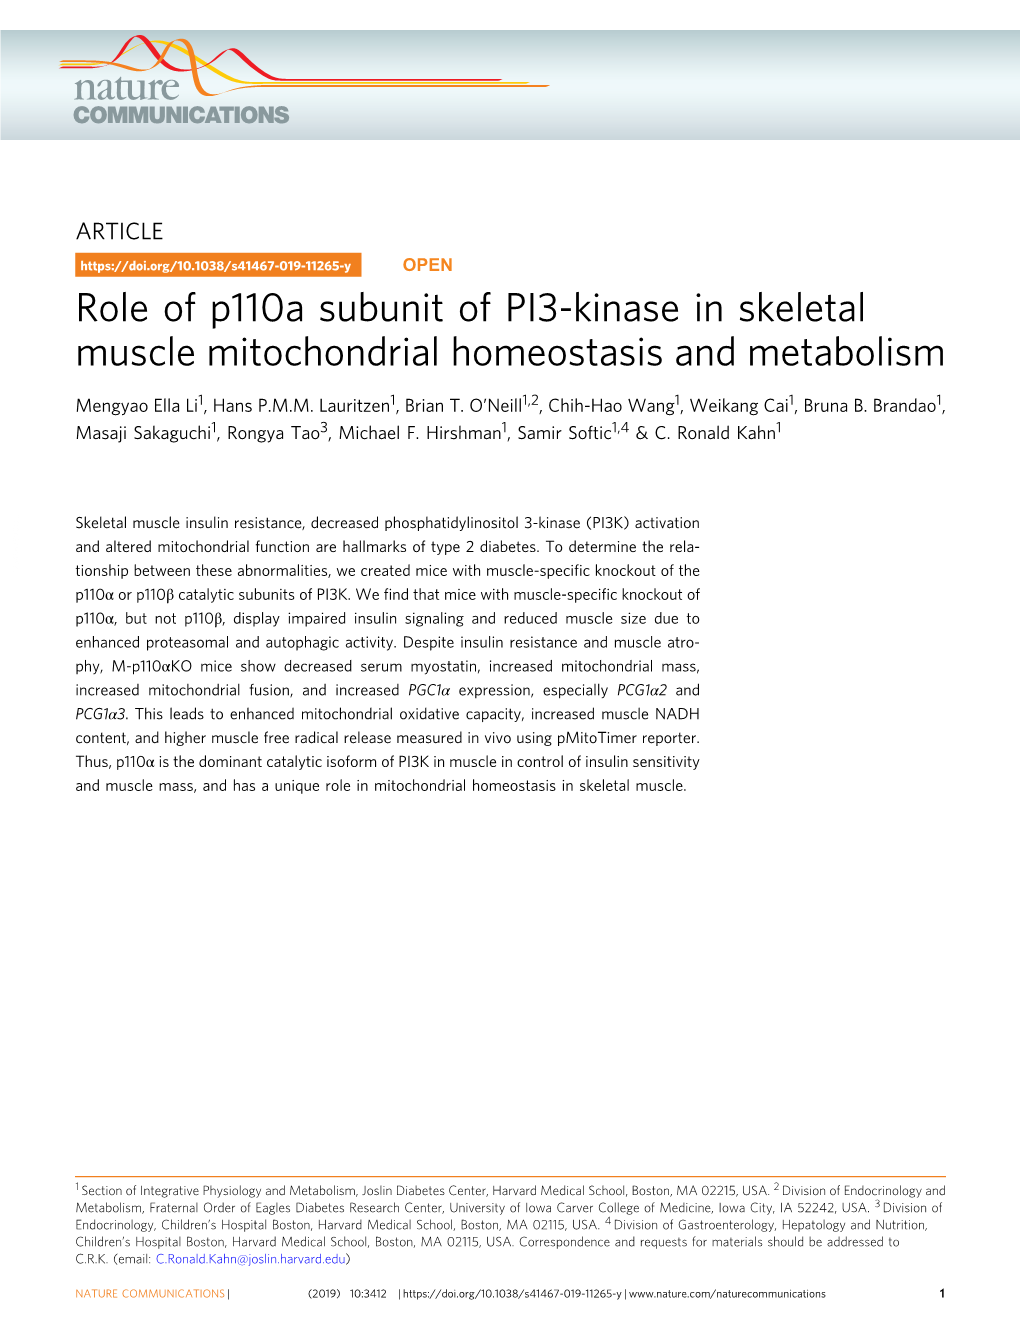 Role of P110a Subunit of PI3-Kinase in Skeletal Muscle Mitochondrial Homeostasis and Metabolism